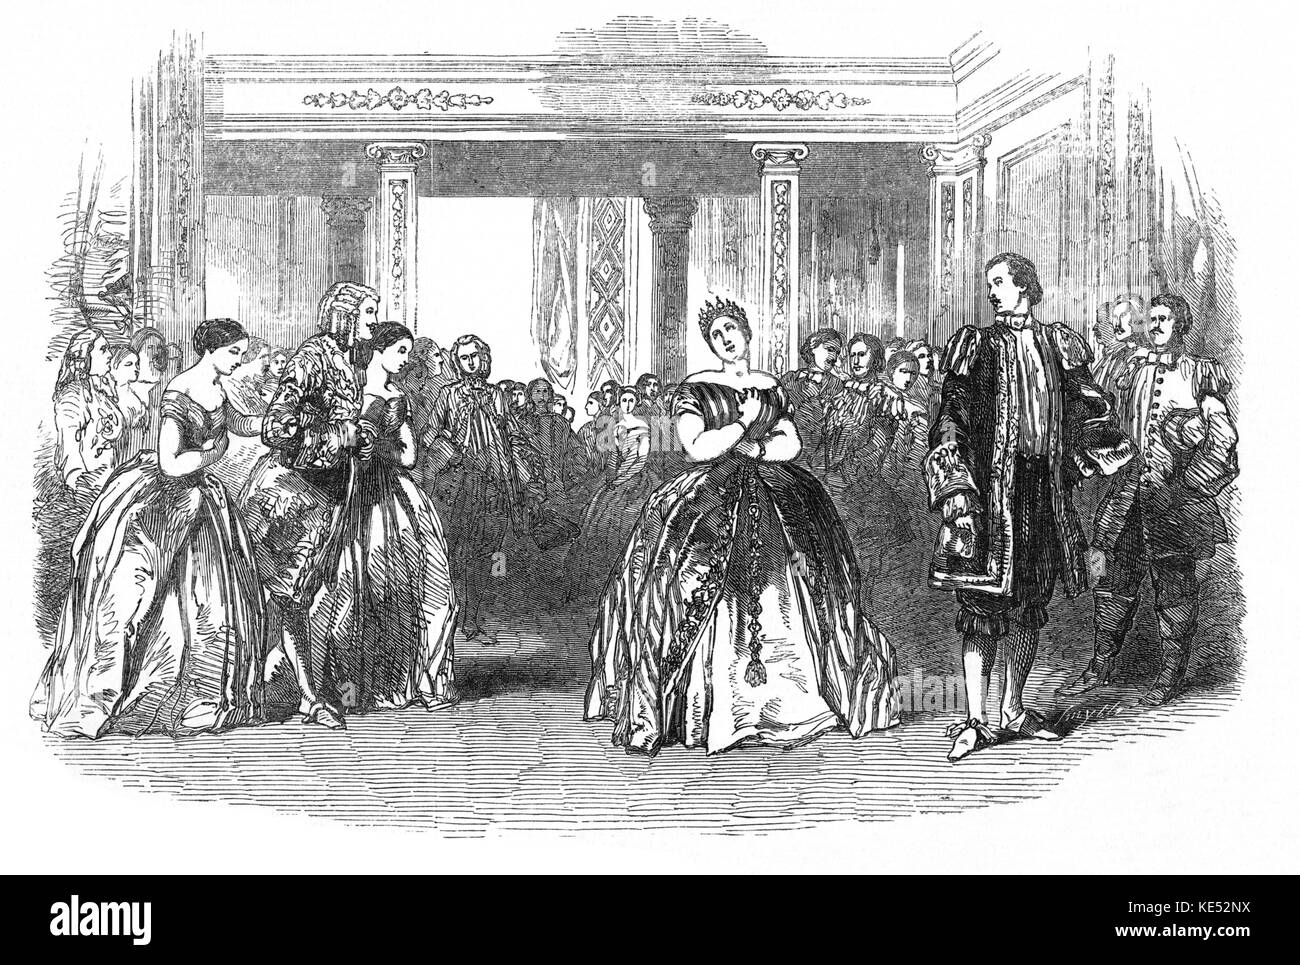 La Cenerentola / Cinderella by Rossini produced at Her Majesty's Theatre, London with Alboni in title role.  Source: Illustrated London News 1849. Italian composer: 29 February 1792 - 13 November 1868. Stock Photo